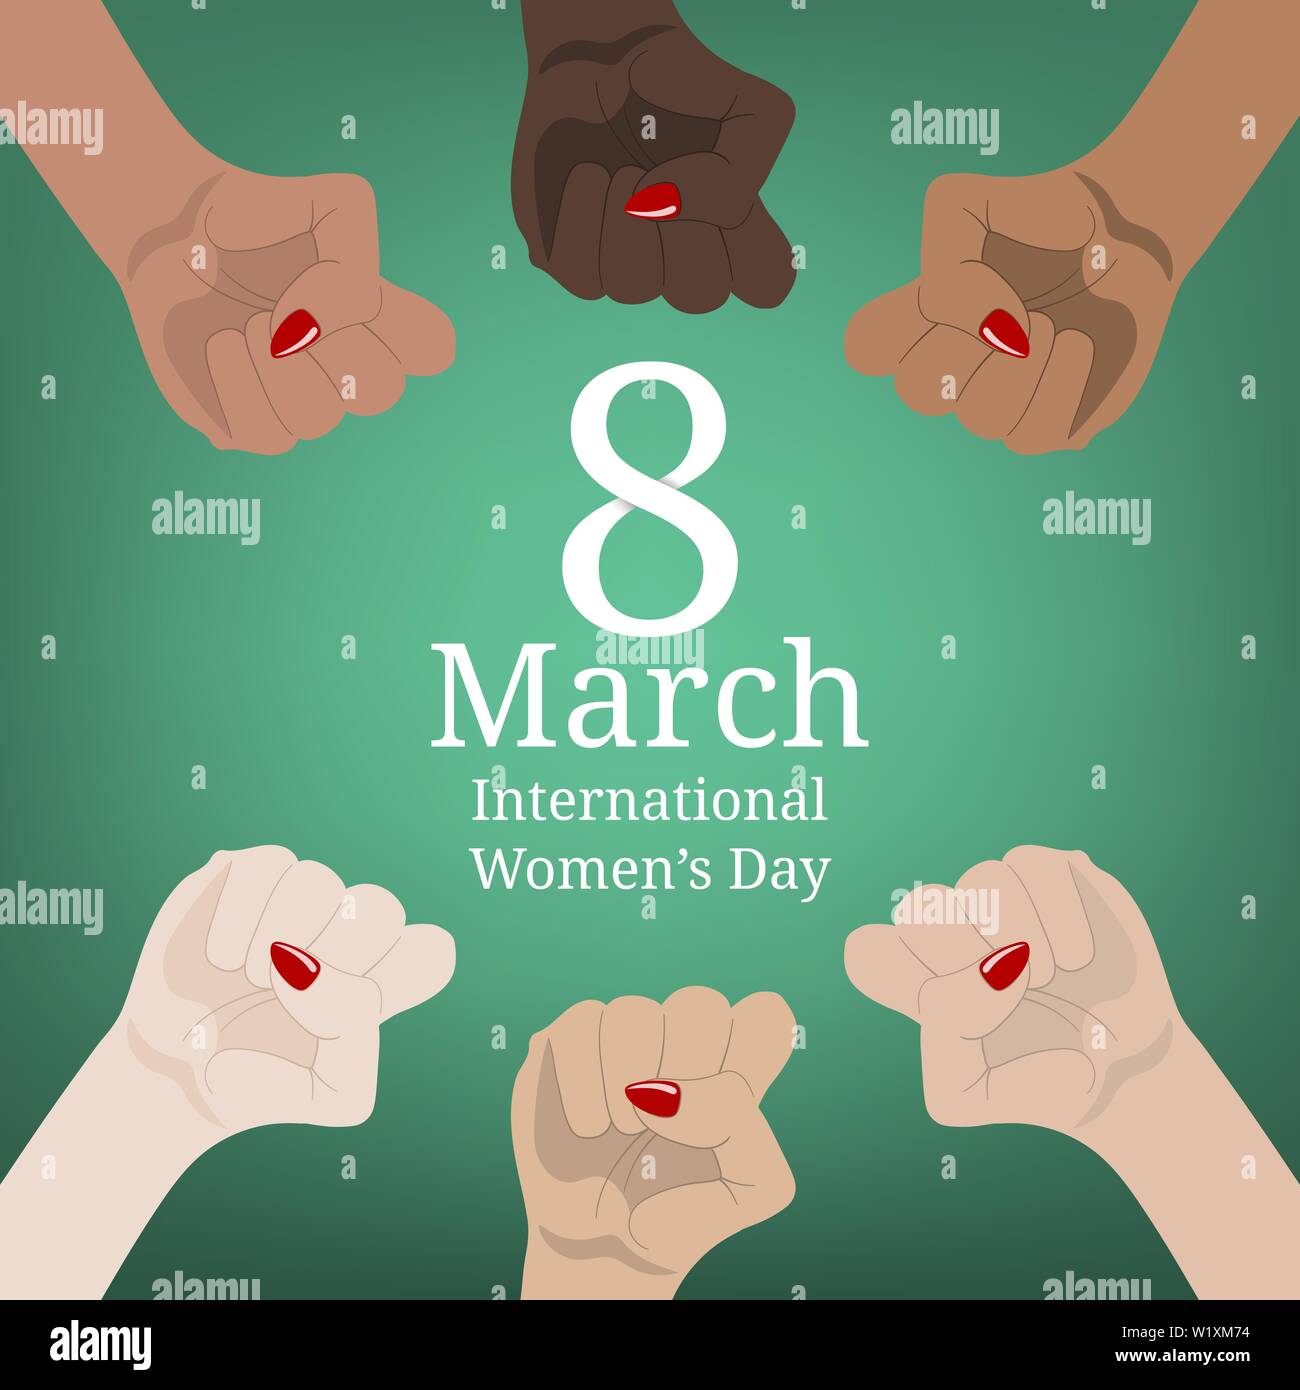 International Women's Day Banner. Women's March. Multinational Equality. Female hand with her fist raised up. Girl Power. Feminism concept. Vector ill Stock Vector